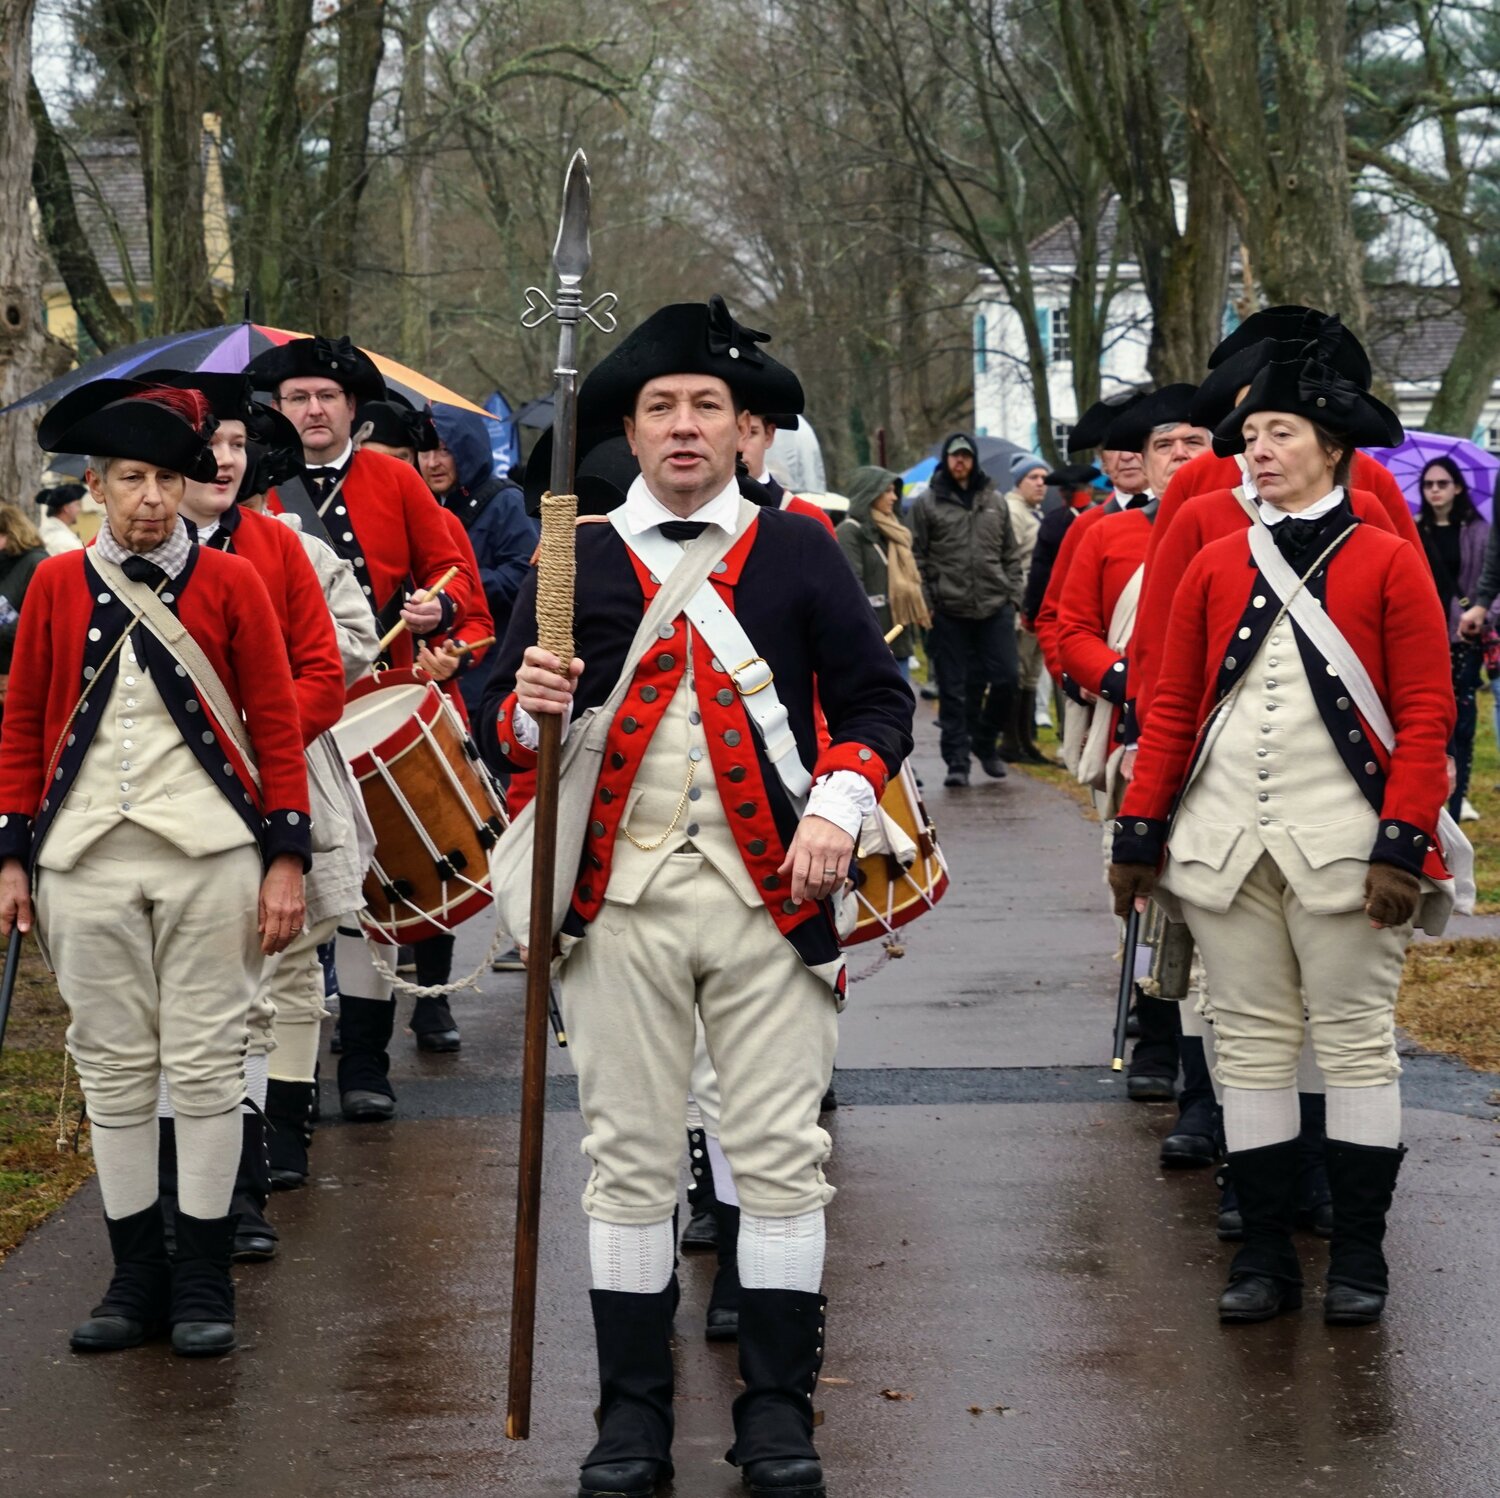 A fife-and-drum corps provided the soundtrack for Sunday’s river crossing at Washington Crossing Historic Park.